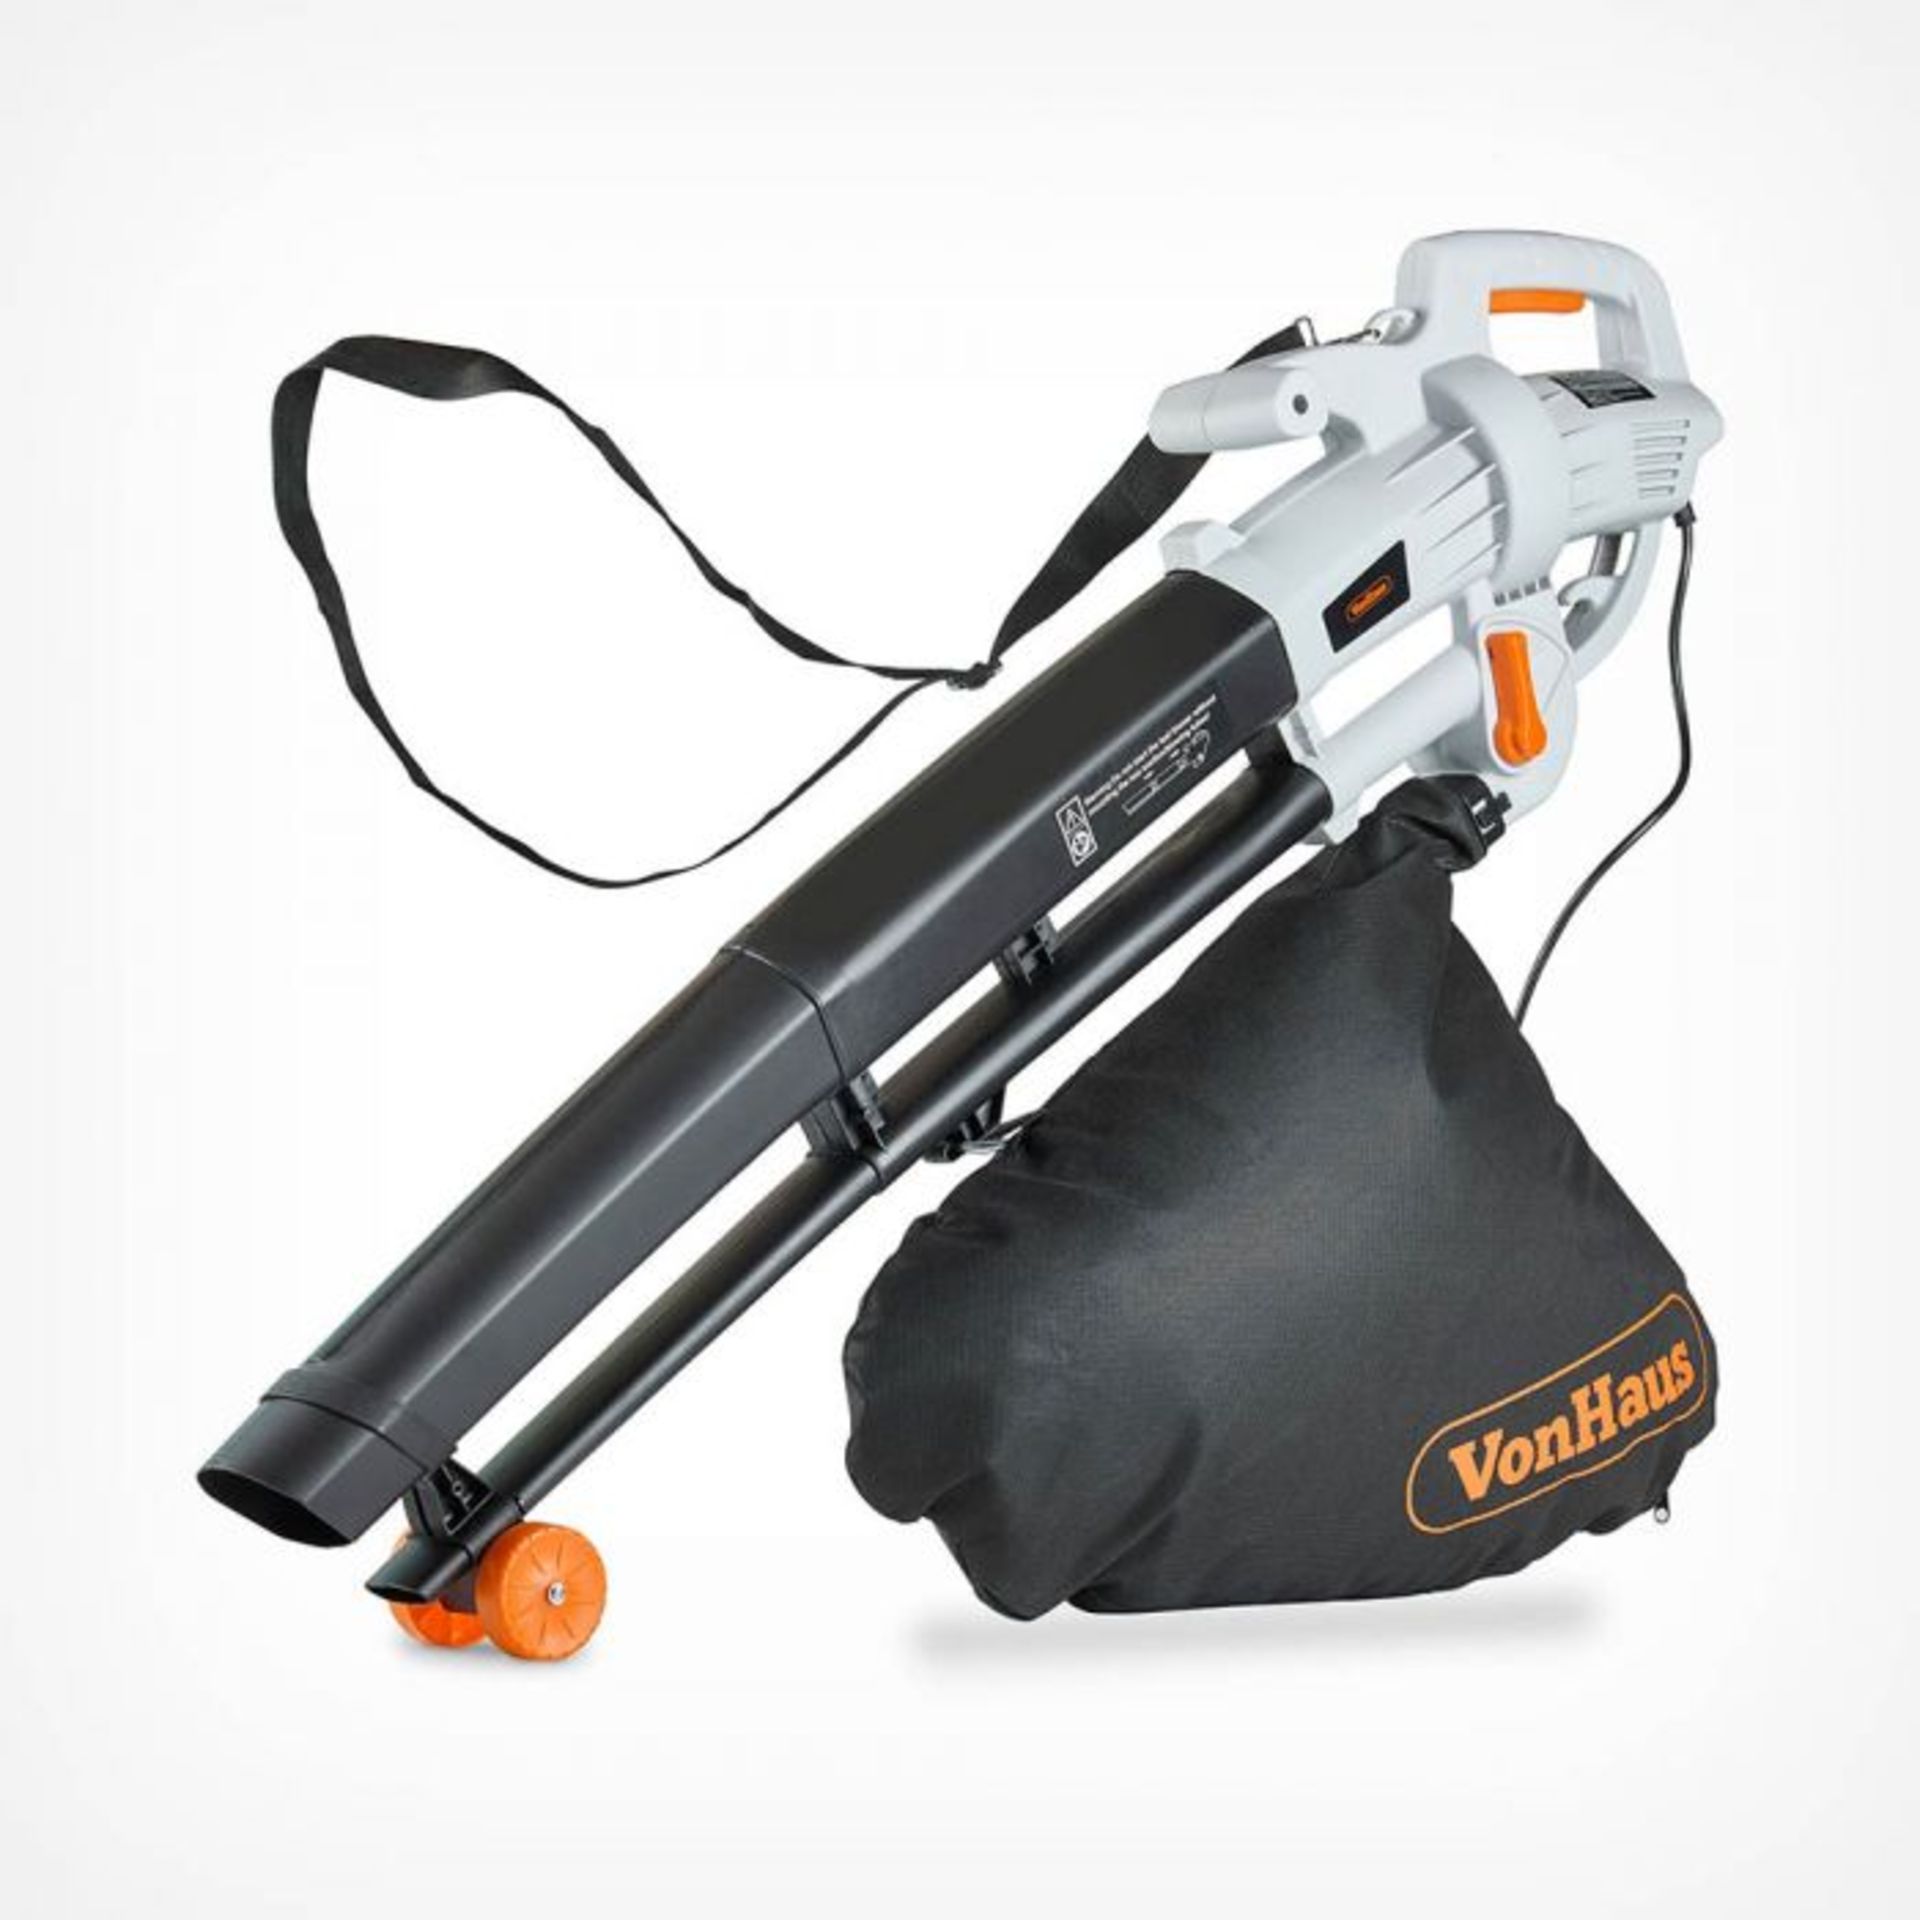 (V321) 3000W Leaf Blower Keep your garden tidy with the Leaf Blower Powerful 3000W motor blow... - Image 2 of 4